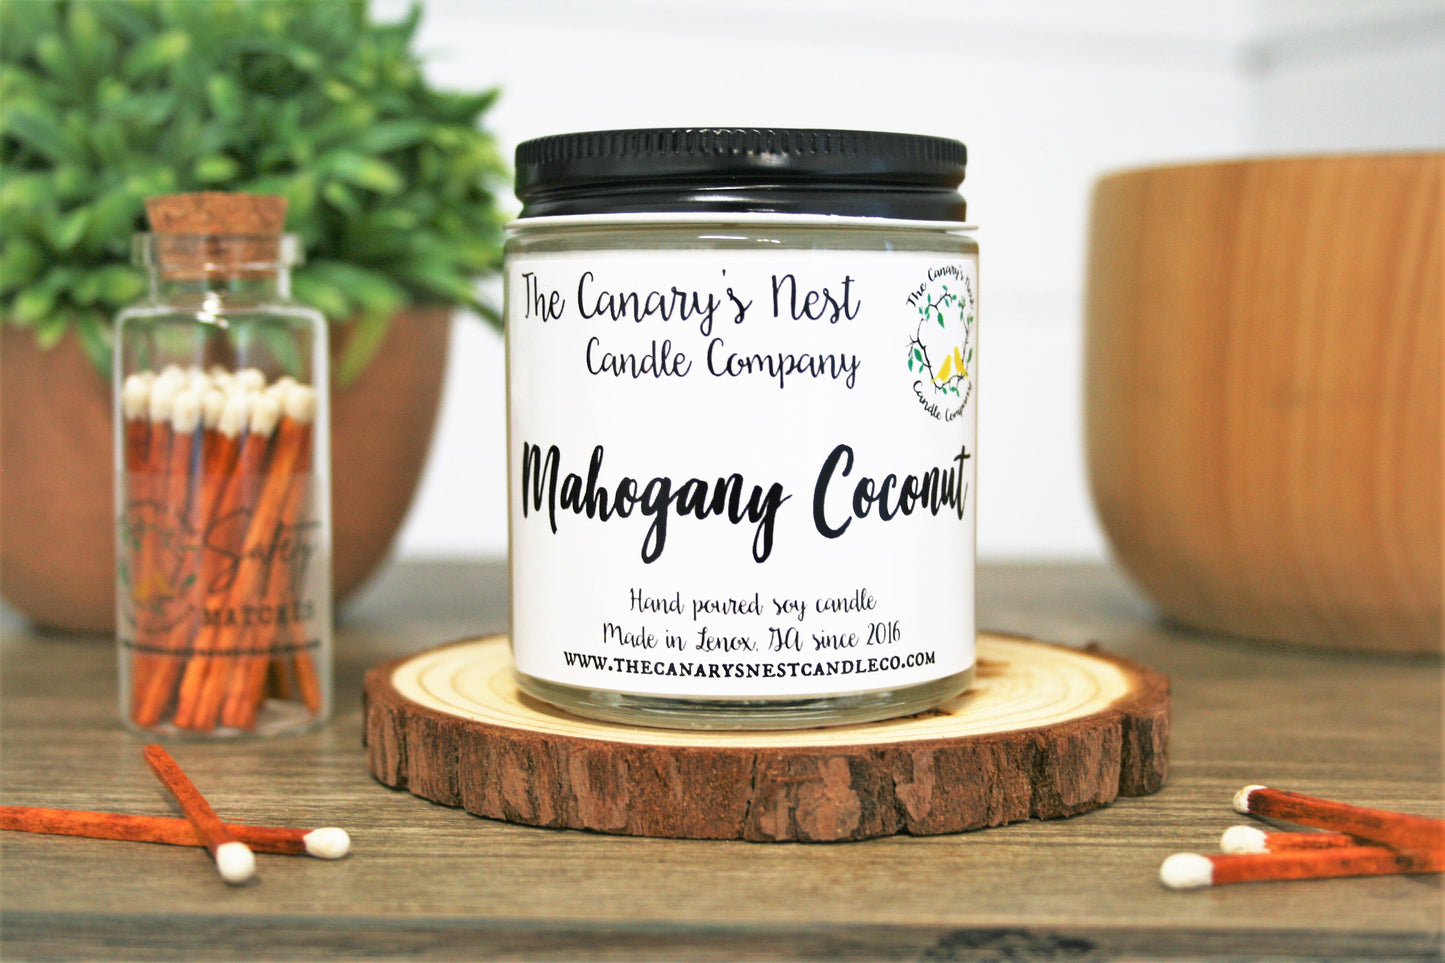 Mahogany Coconut Scented Soy Candle